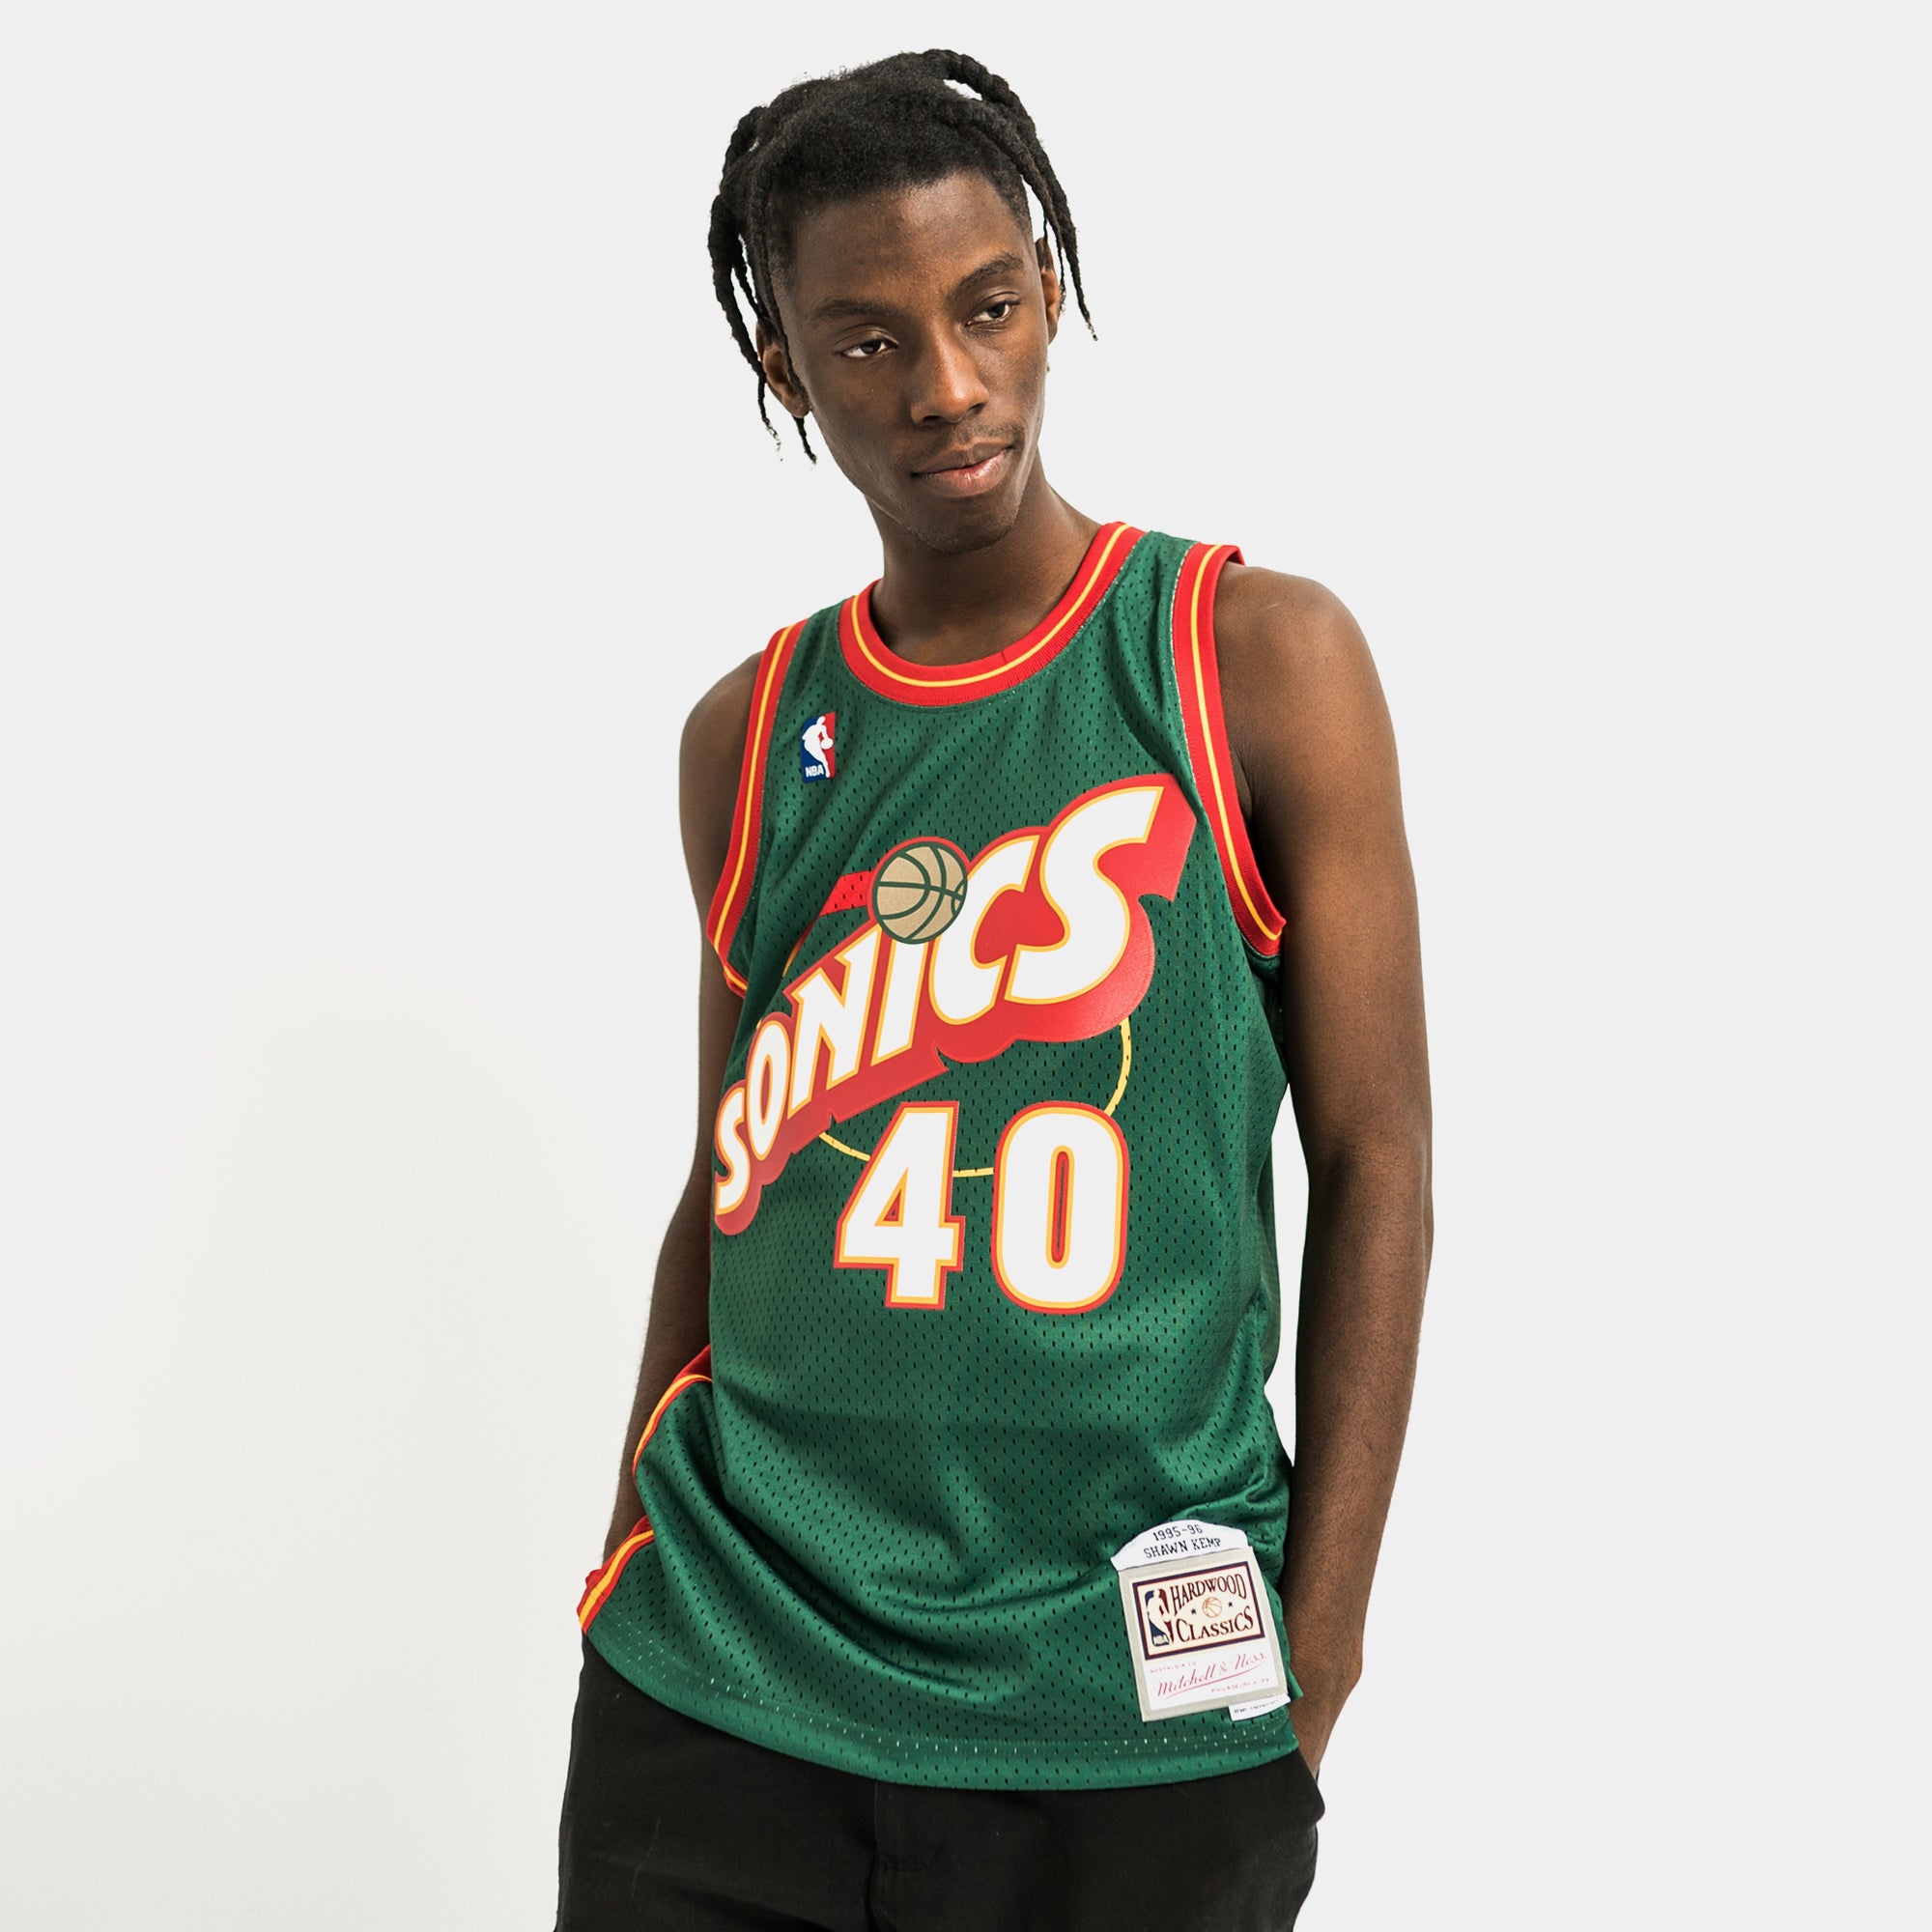 SEATTLE SUPERSONICS BASKETBALL THROWBACK SHORTS - Prime Reps